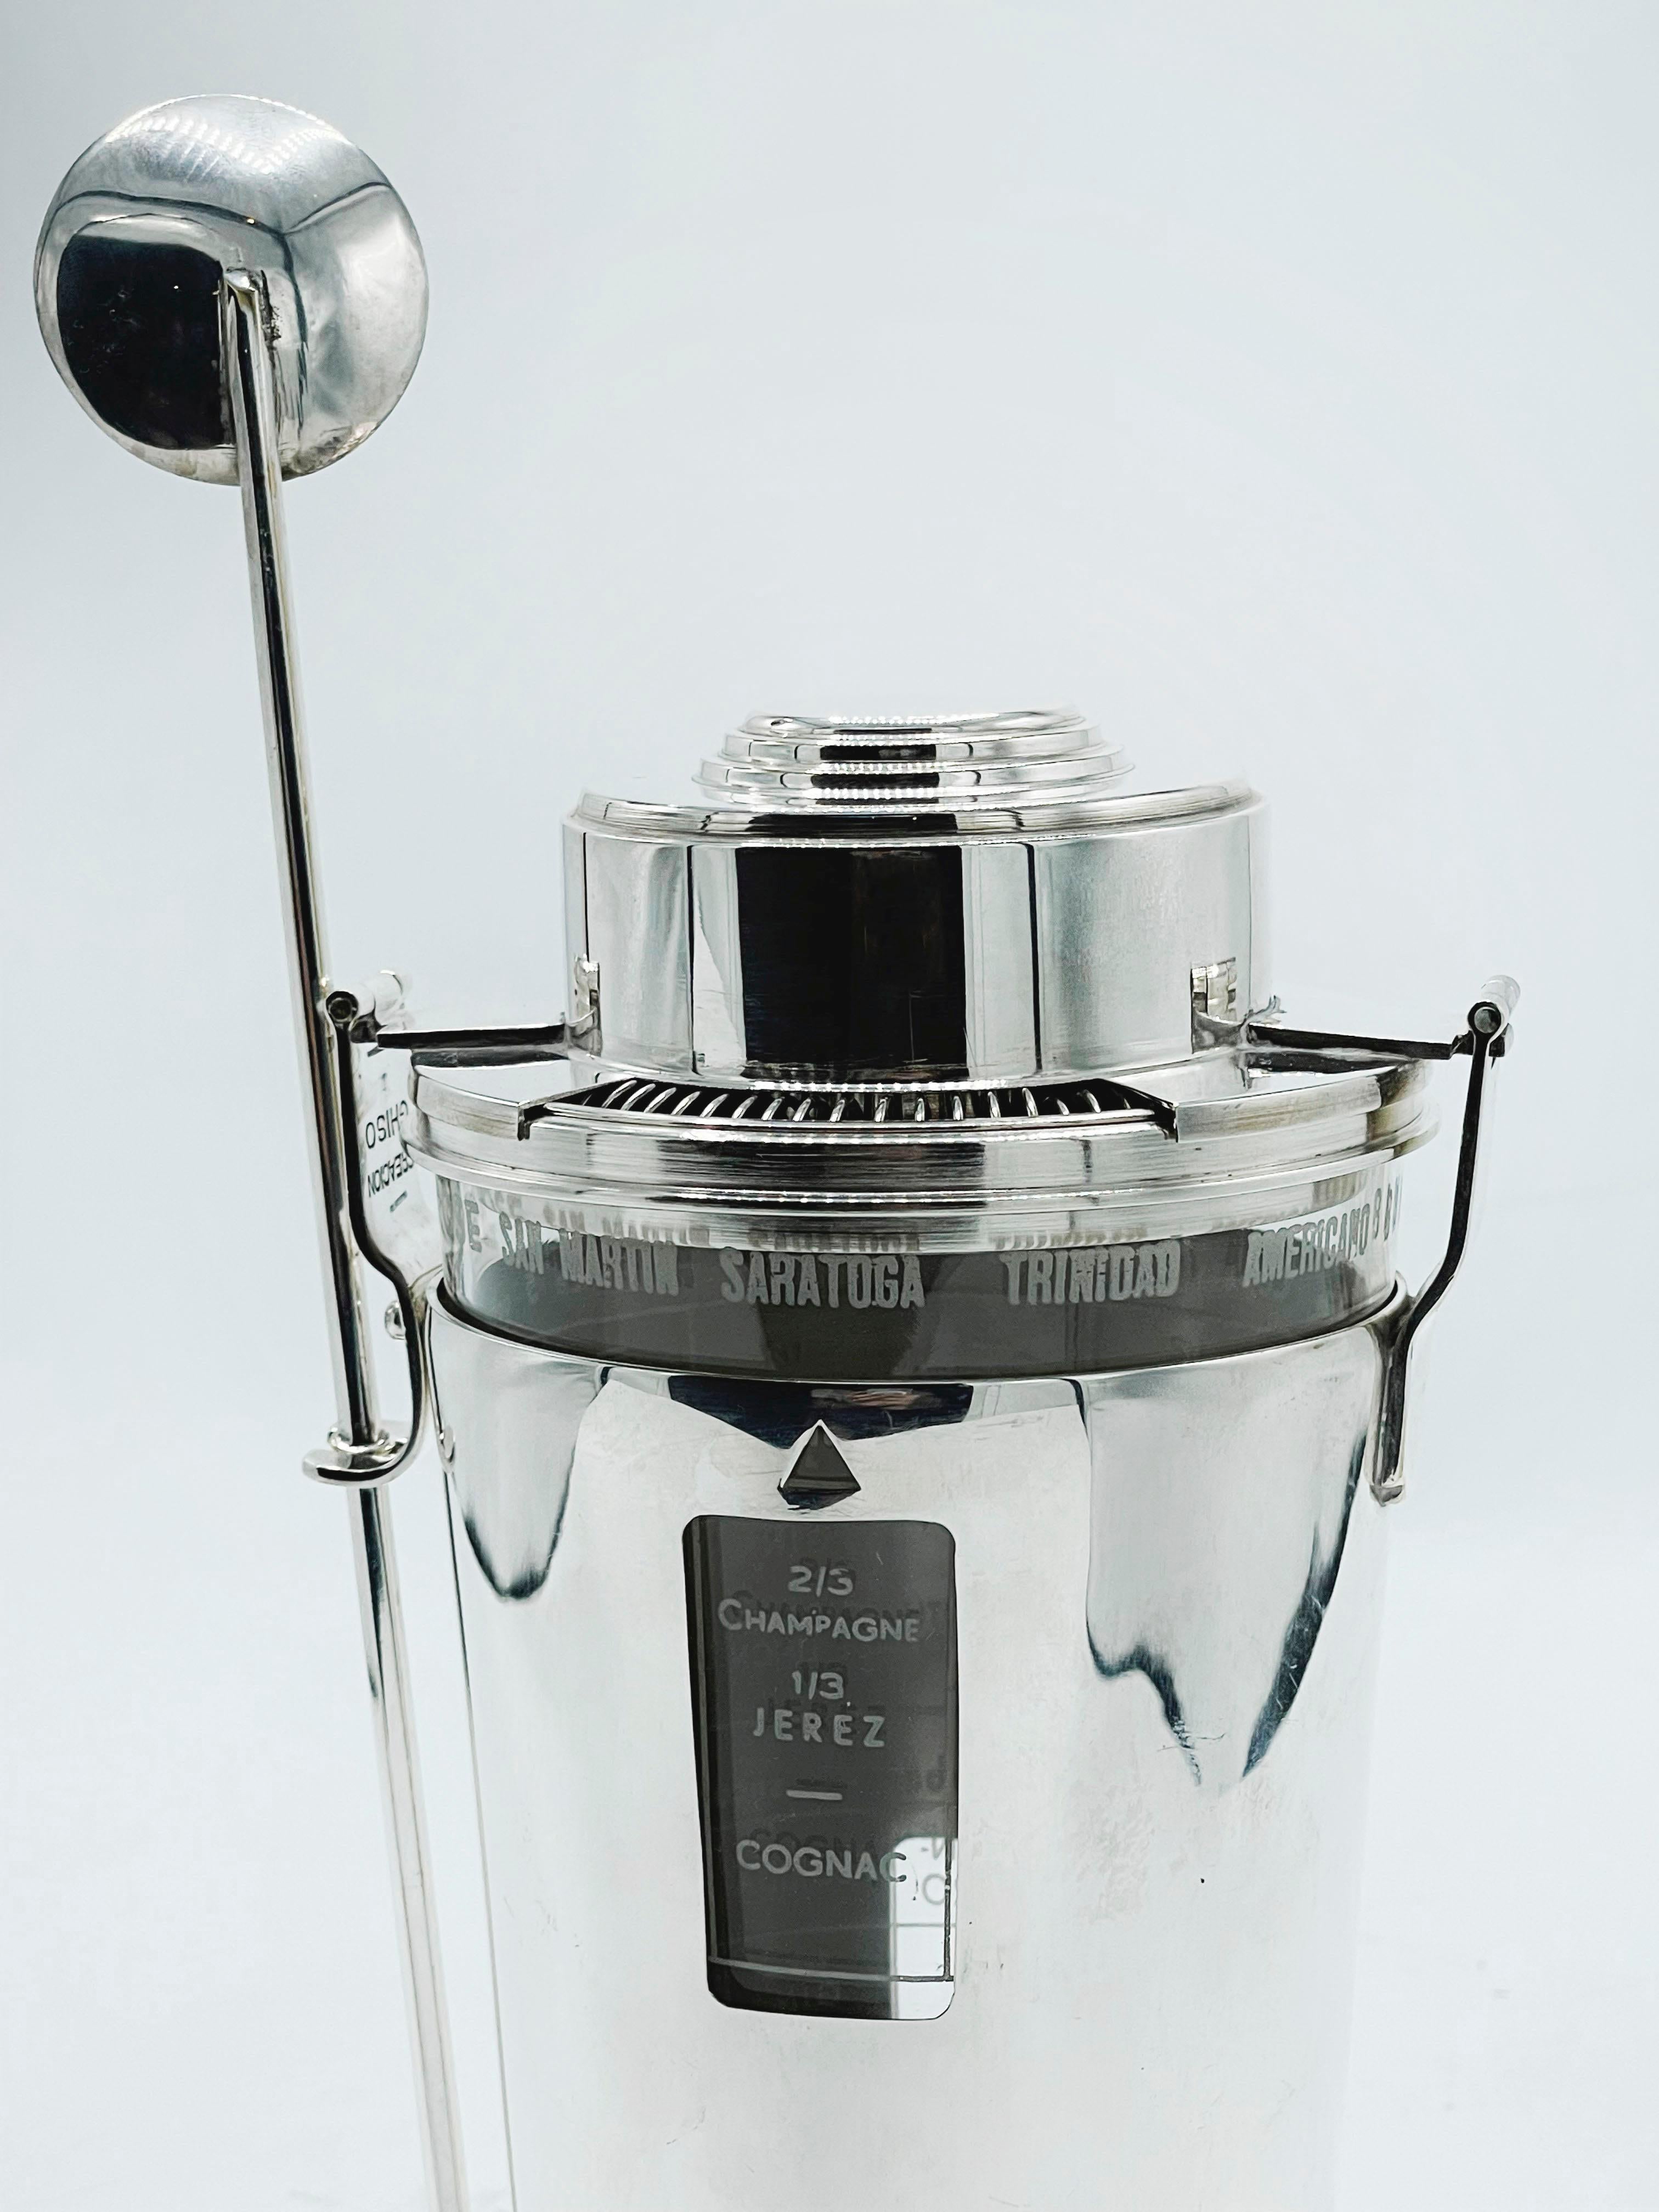 20th Century Art Deco Recipes Cocktail Shaker “the Barman“ by Ghiso, France 1930’s For Sale